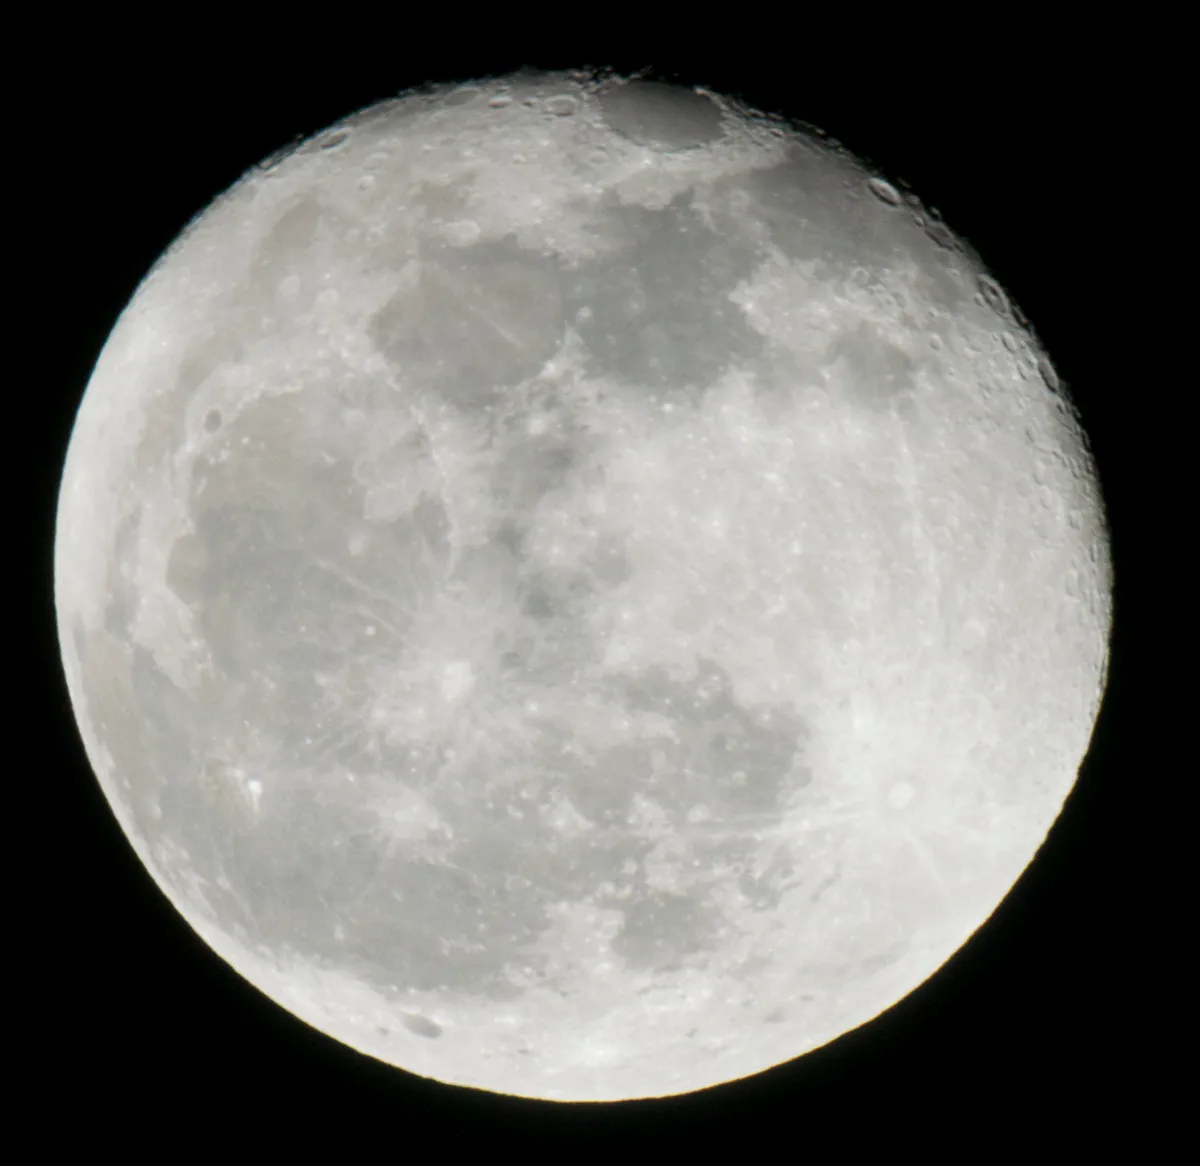 The Day After Full Moon by Dafydd, New Quay, UK. Equipment: Nikon 3200, T-adaptor, x2 Barlow lens, 4